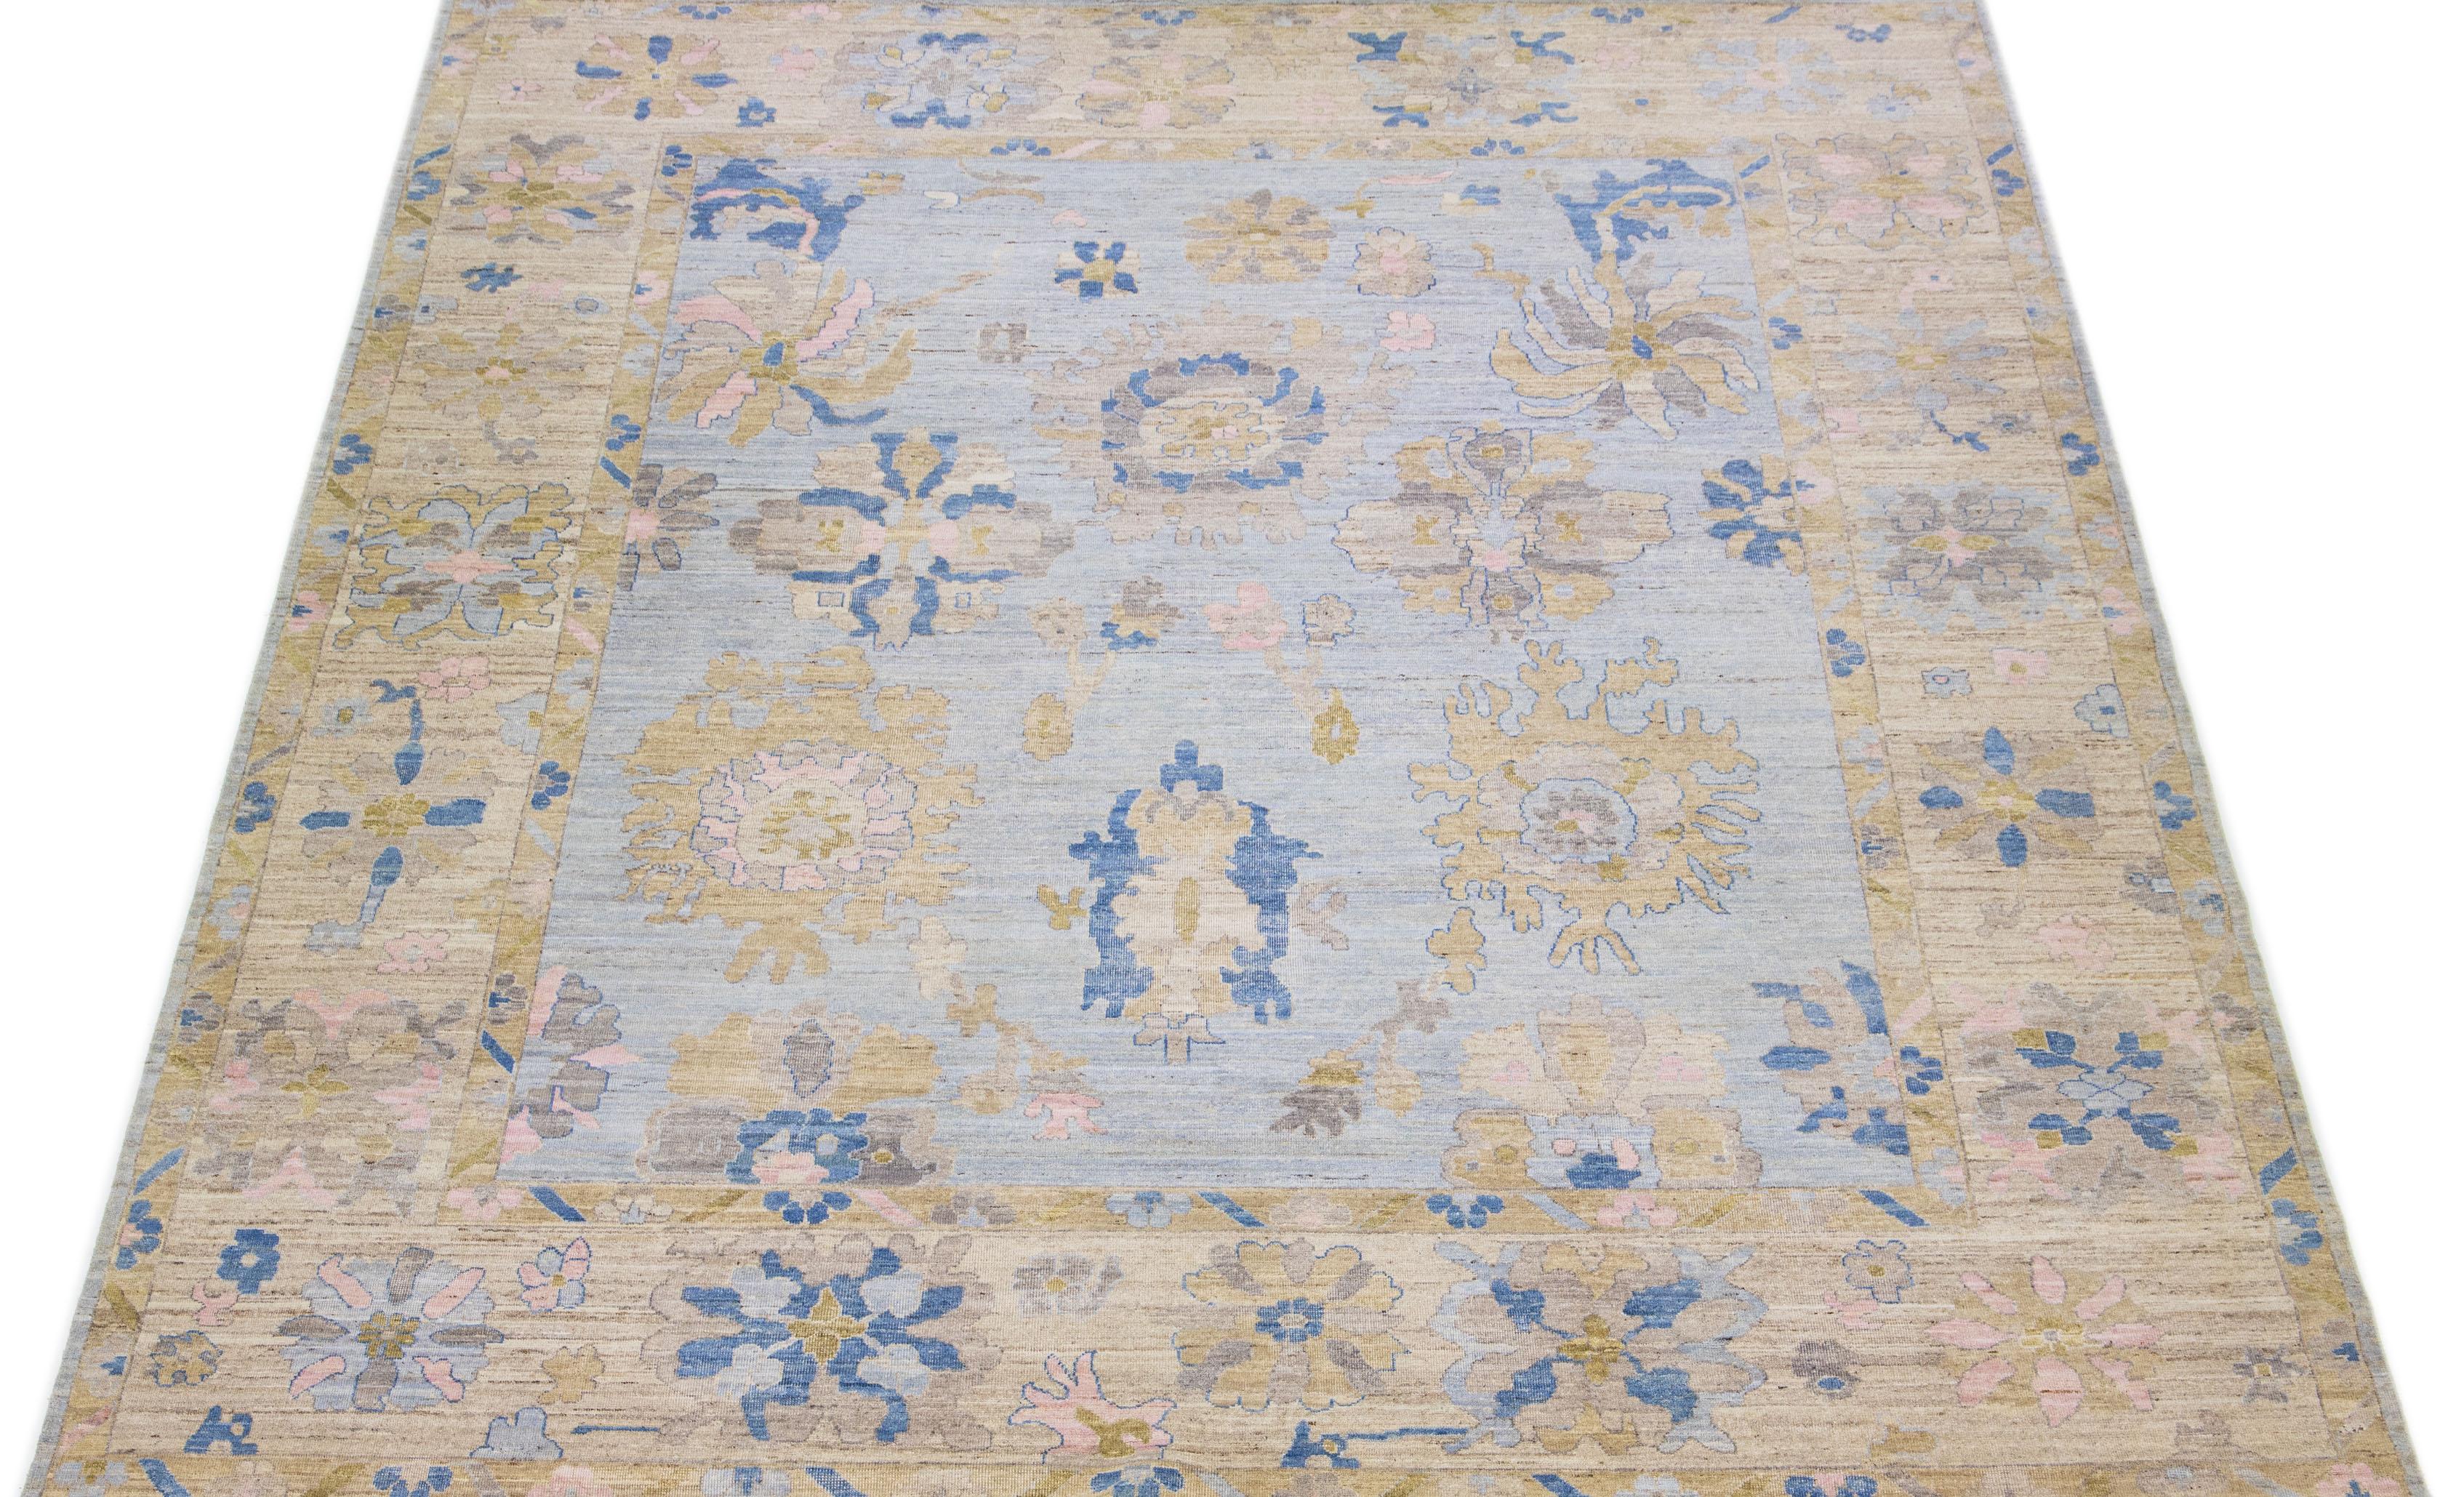 This contemporary Oversize Oushak Style rug boasts a hand-knotted wool construction, complemented by a charming light blue color. Its tastefully crafted frame showcases lovely floral motifs in a fascinating blend of brown, pink, and blue